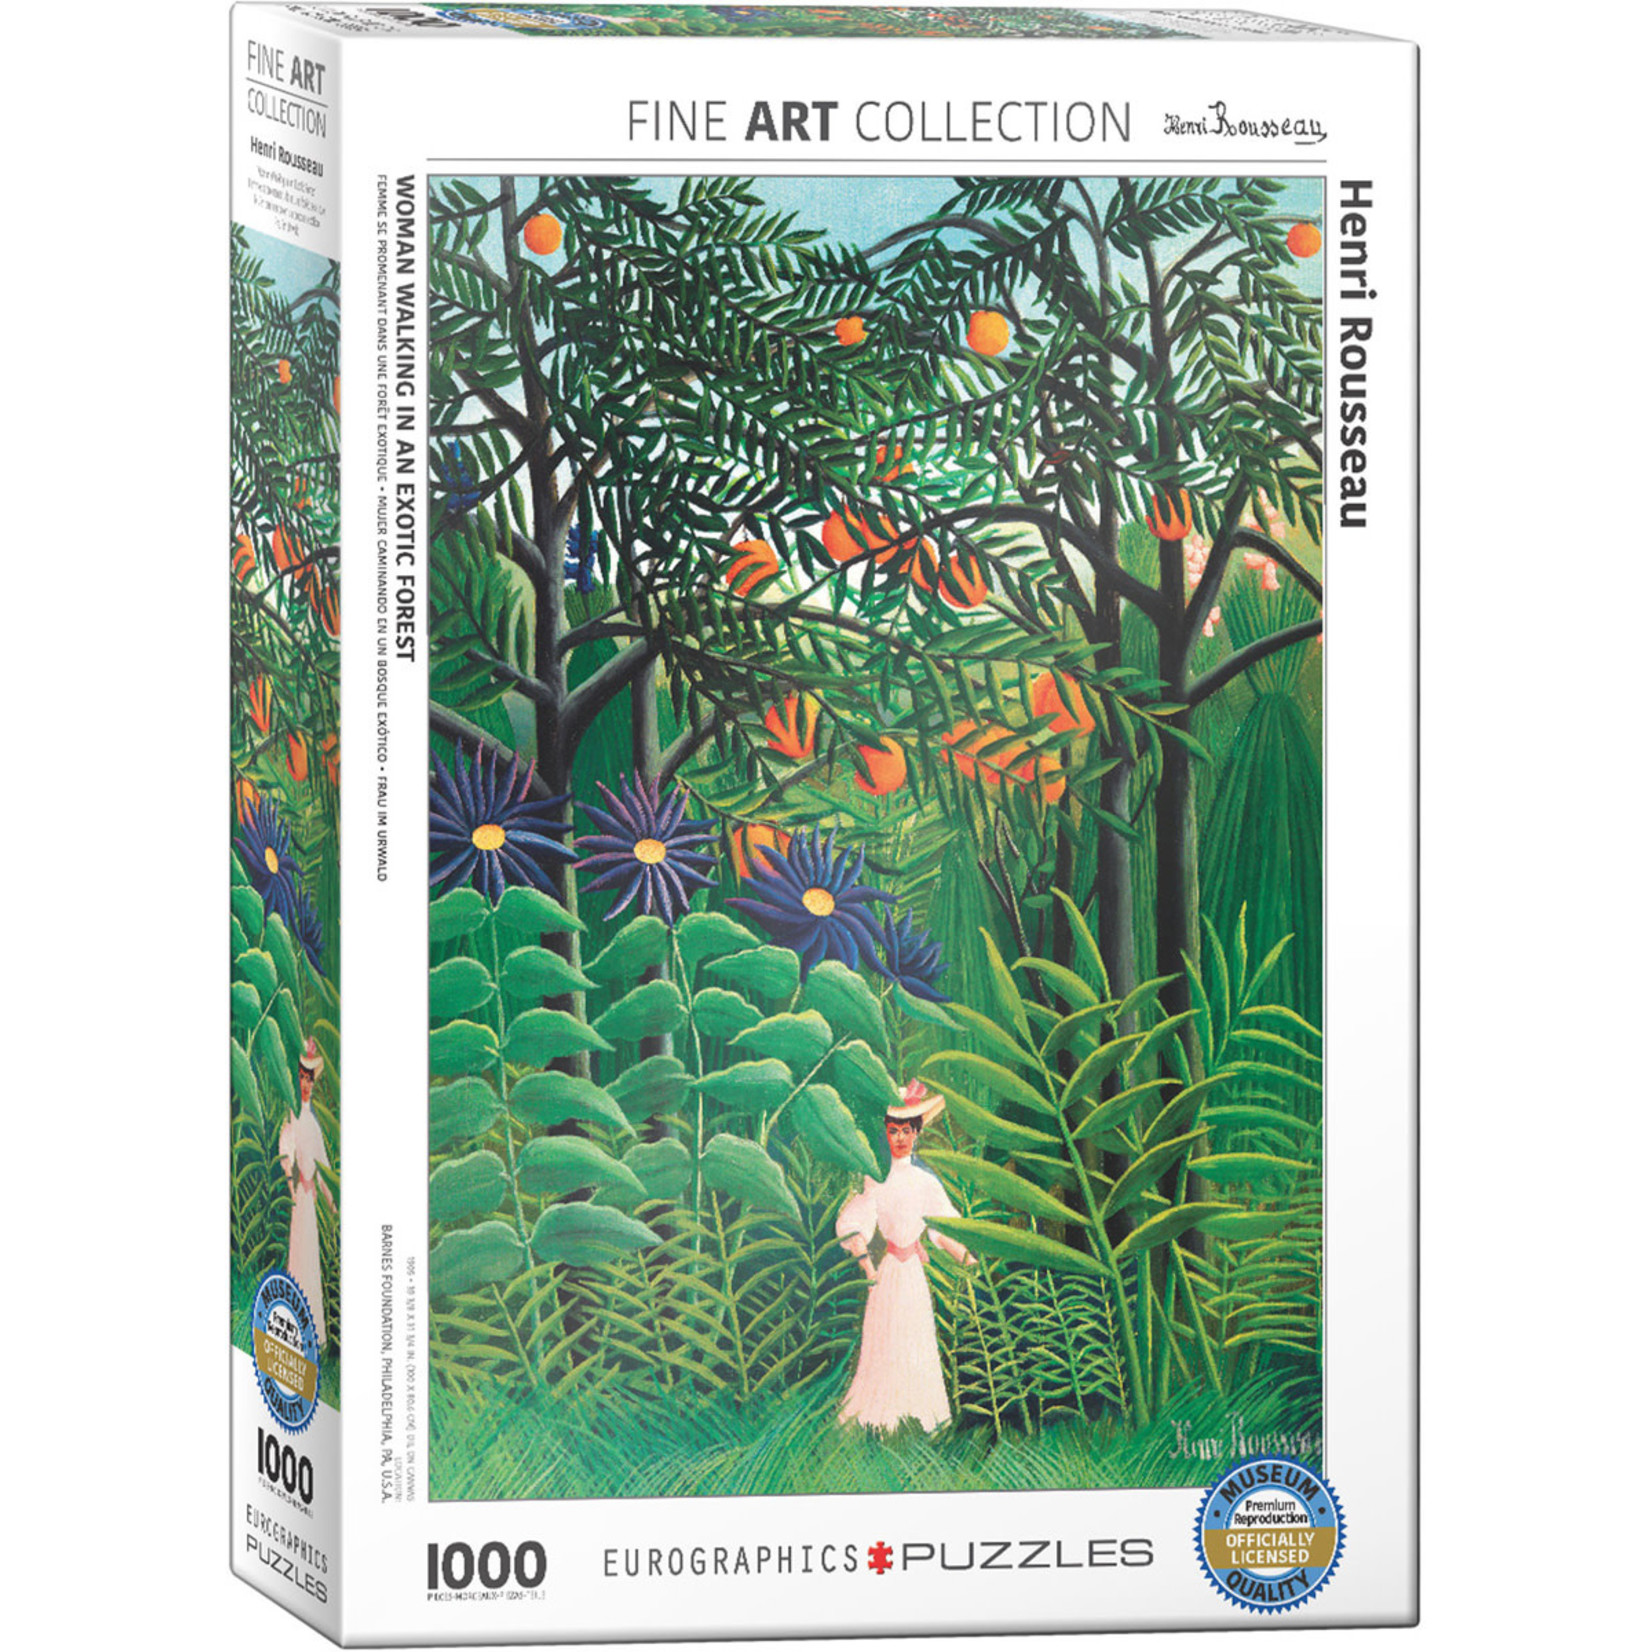 Eurographics Woman in an Exotic Forest - Rousseau